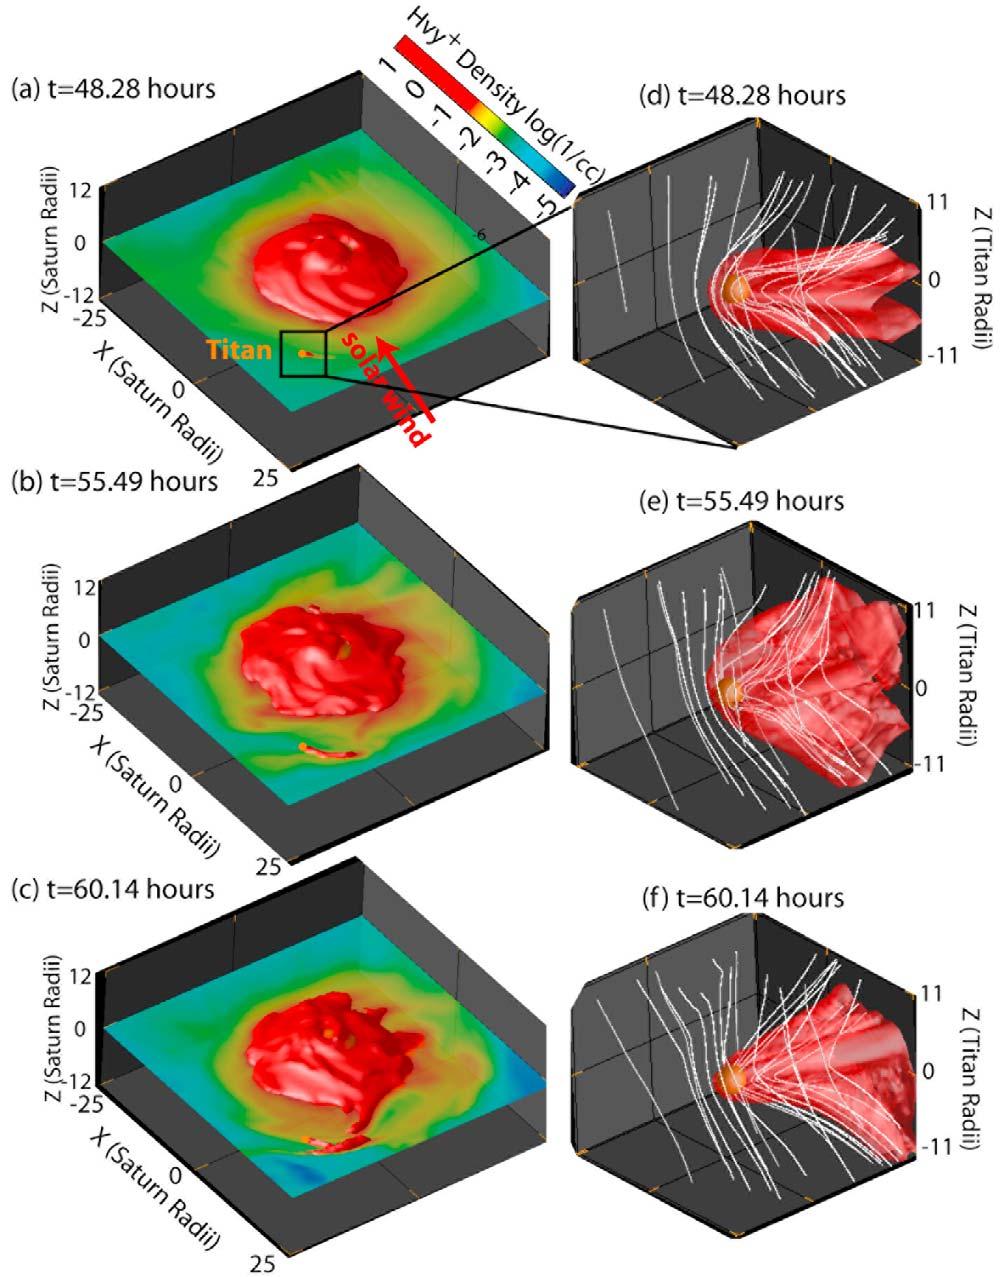 Figure 3. Two views of the Saturn Titan simulation at three different times. (a c) The global view of the Saturn Titan system. The red isosurface of constant Hvy + density equal to 0.